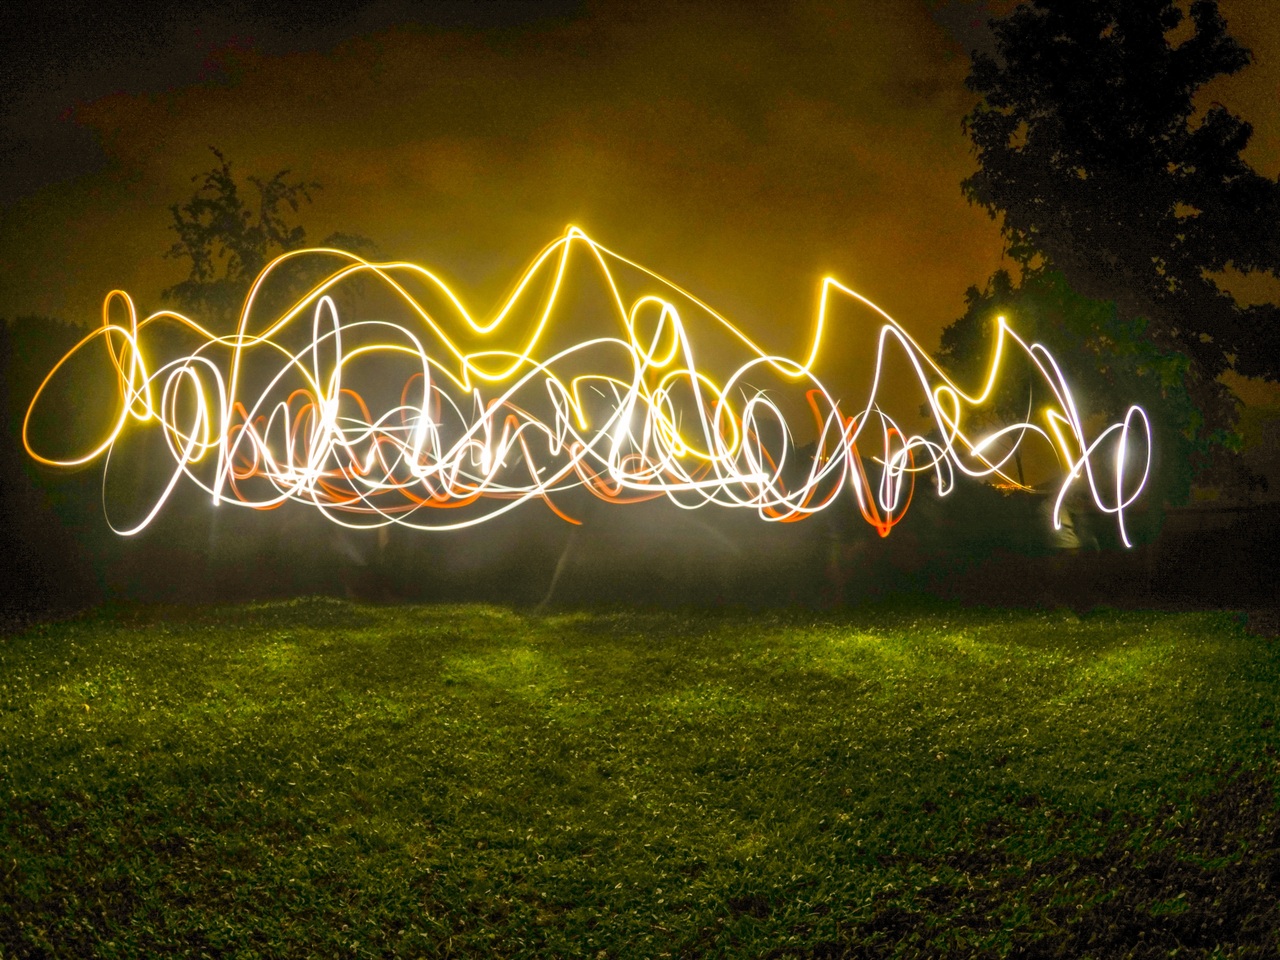 trick-photography-techniques-light-and-time-secrets-of-the-pros-trick-photography-techniques-light-drawing-light-painting-leisure-photography-uniqsource-com